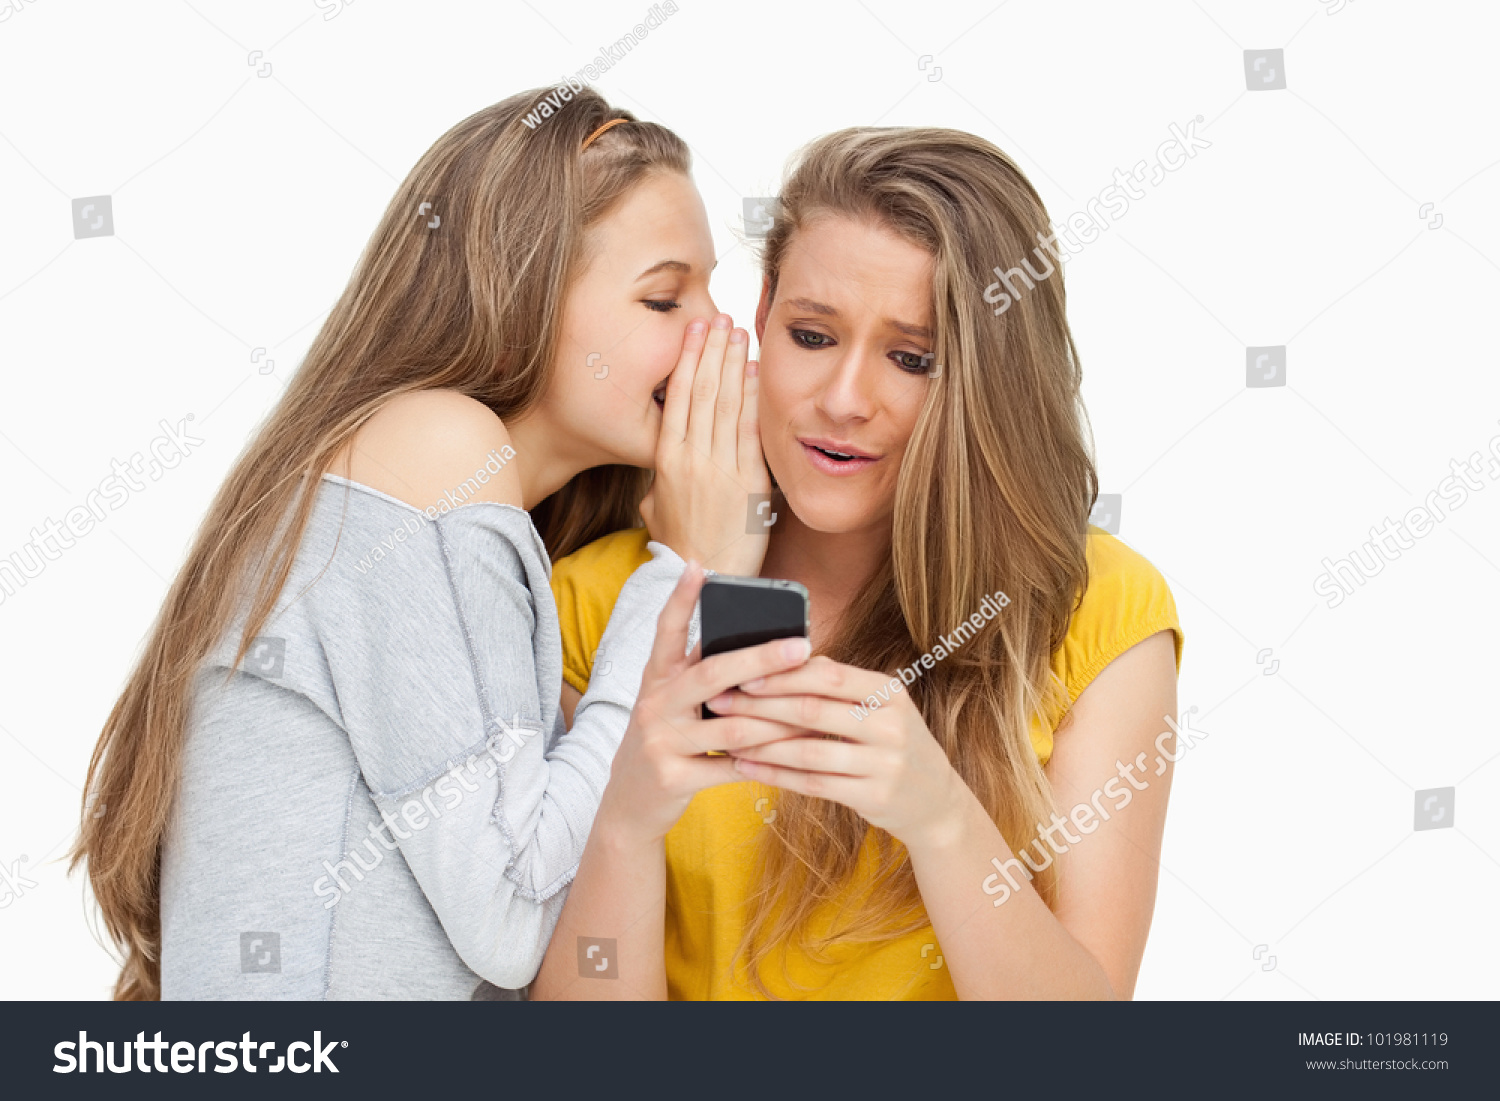 Student whispering to her friend who's texting on her phone against white background #101981119